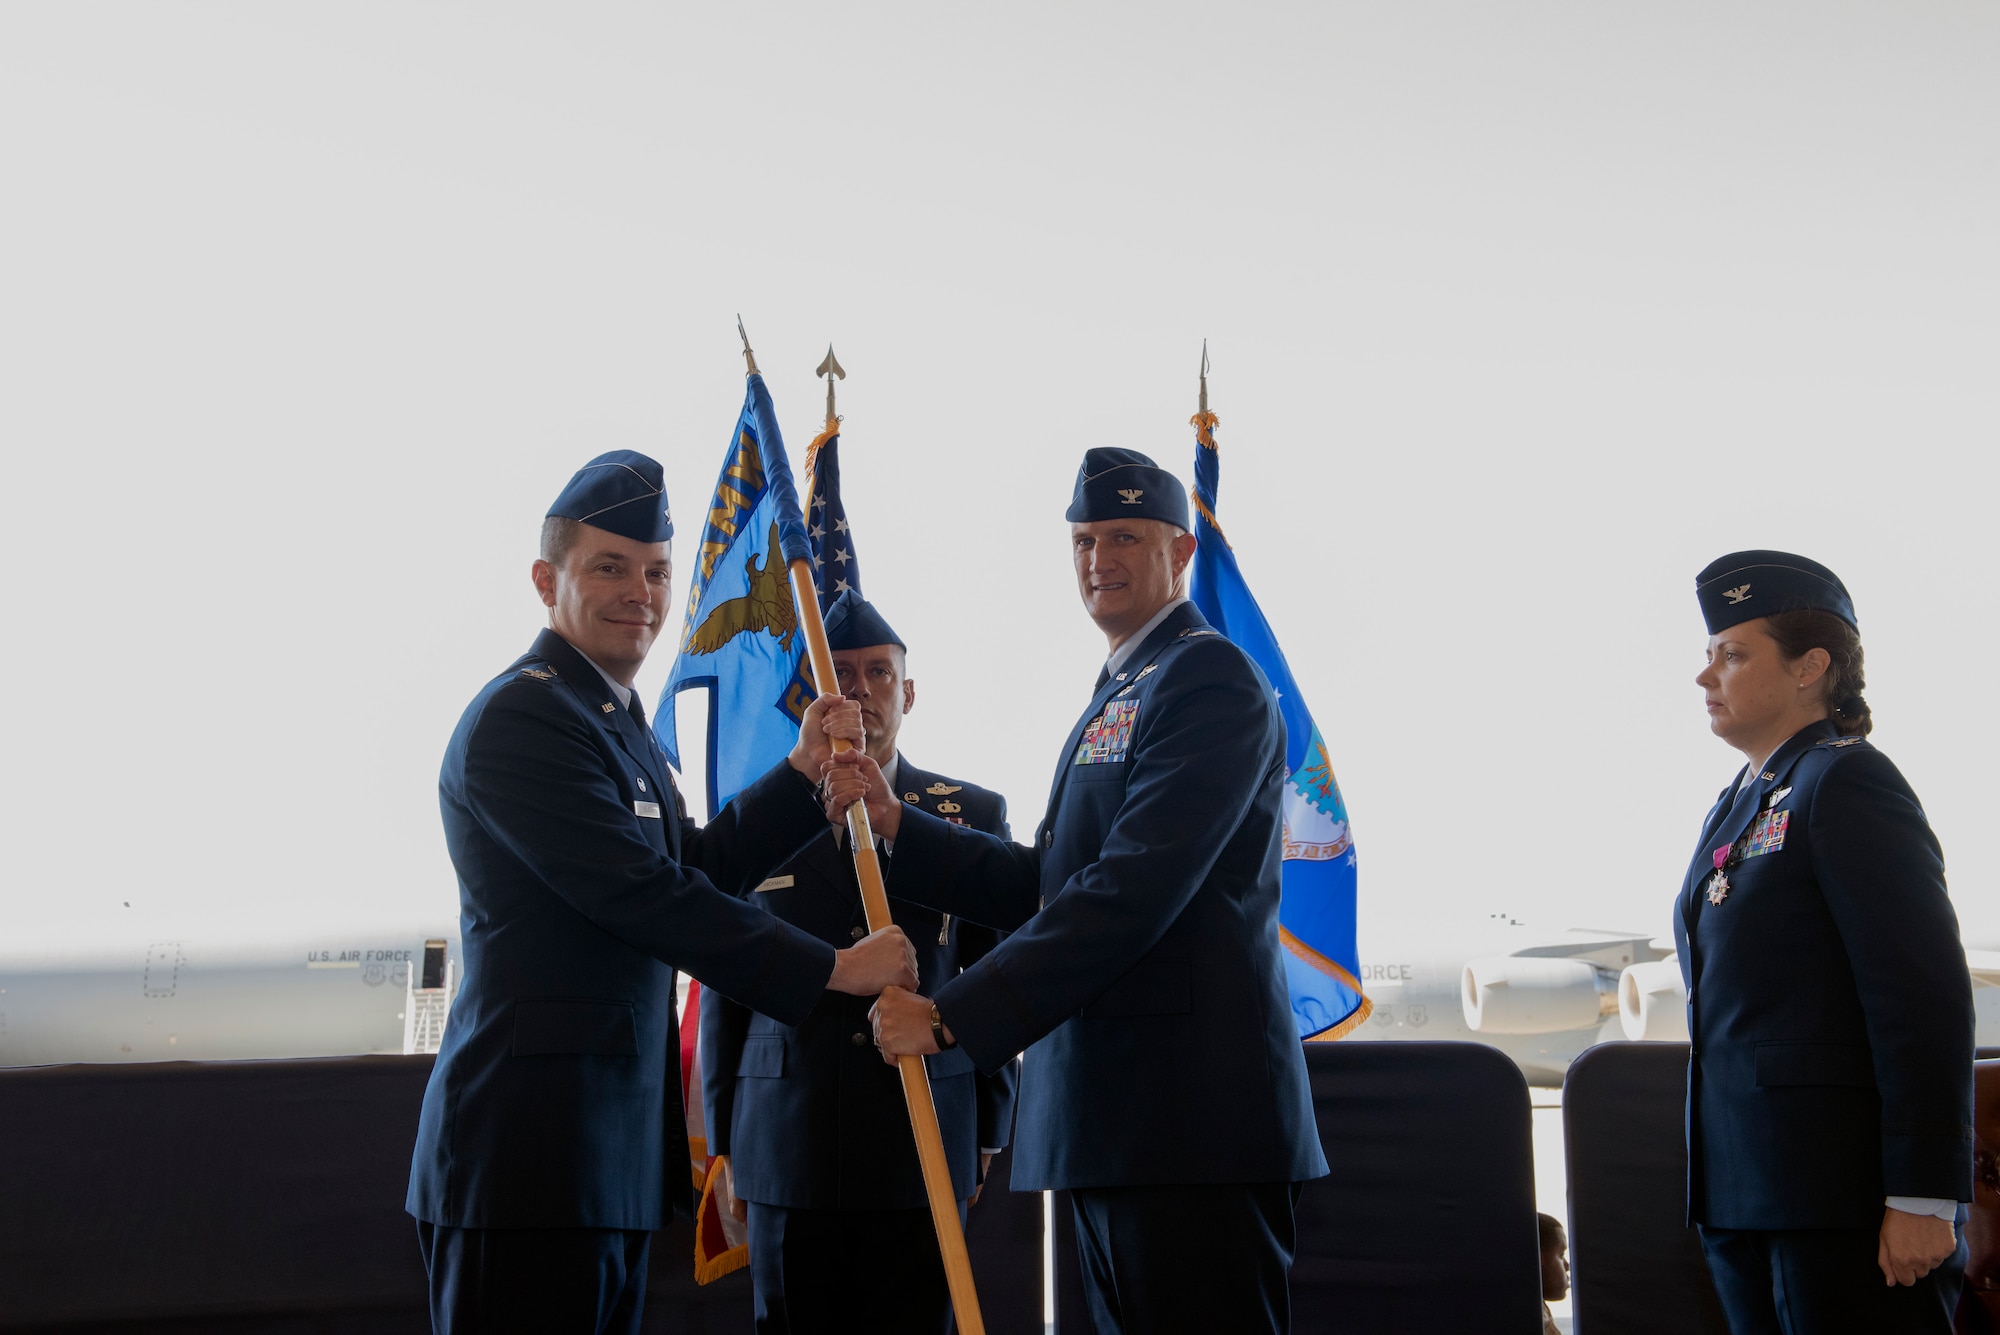 U.S. Air Force Col. Jeff Nelson, left, 60th Air Mobility Wing commander, presents the 60th Operations Group guidon to Col. Gregg Johnson, 60th OG commander, July 26, 2019, during a change of command ceremony at Travis Air Force Base, California. Johnson assumed command from Col. Theresa Weems, outgoing 60th OG commander. (U.S. Air Force photo by Tech. Sgt. James Hodgman)